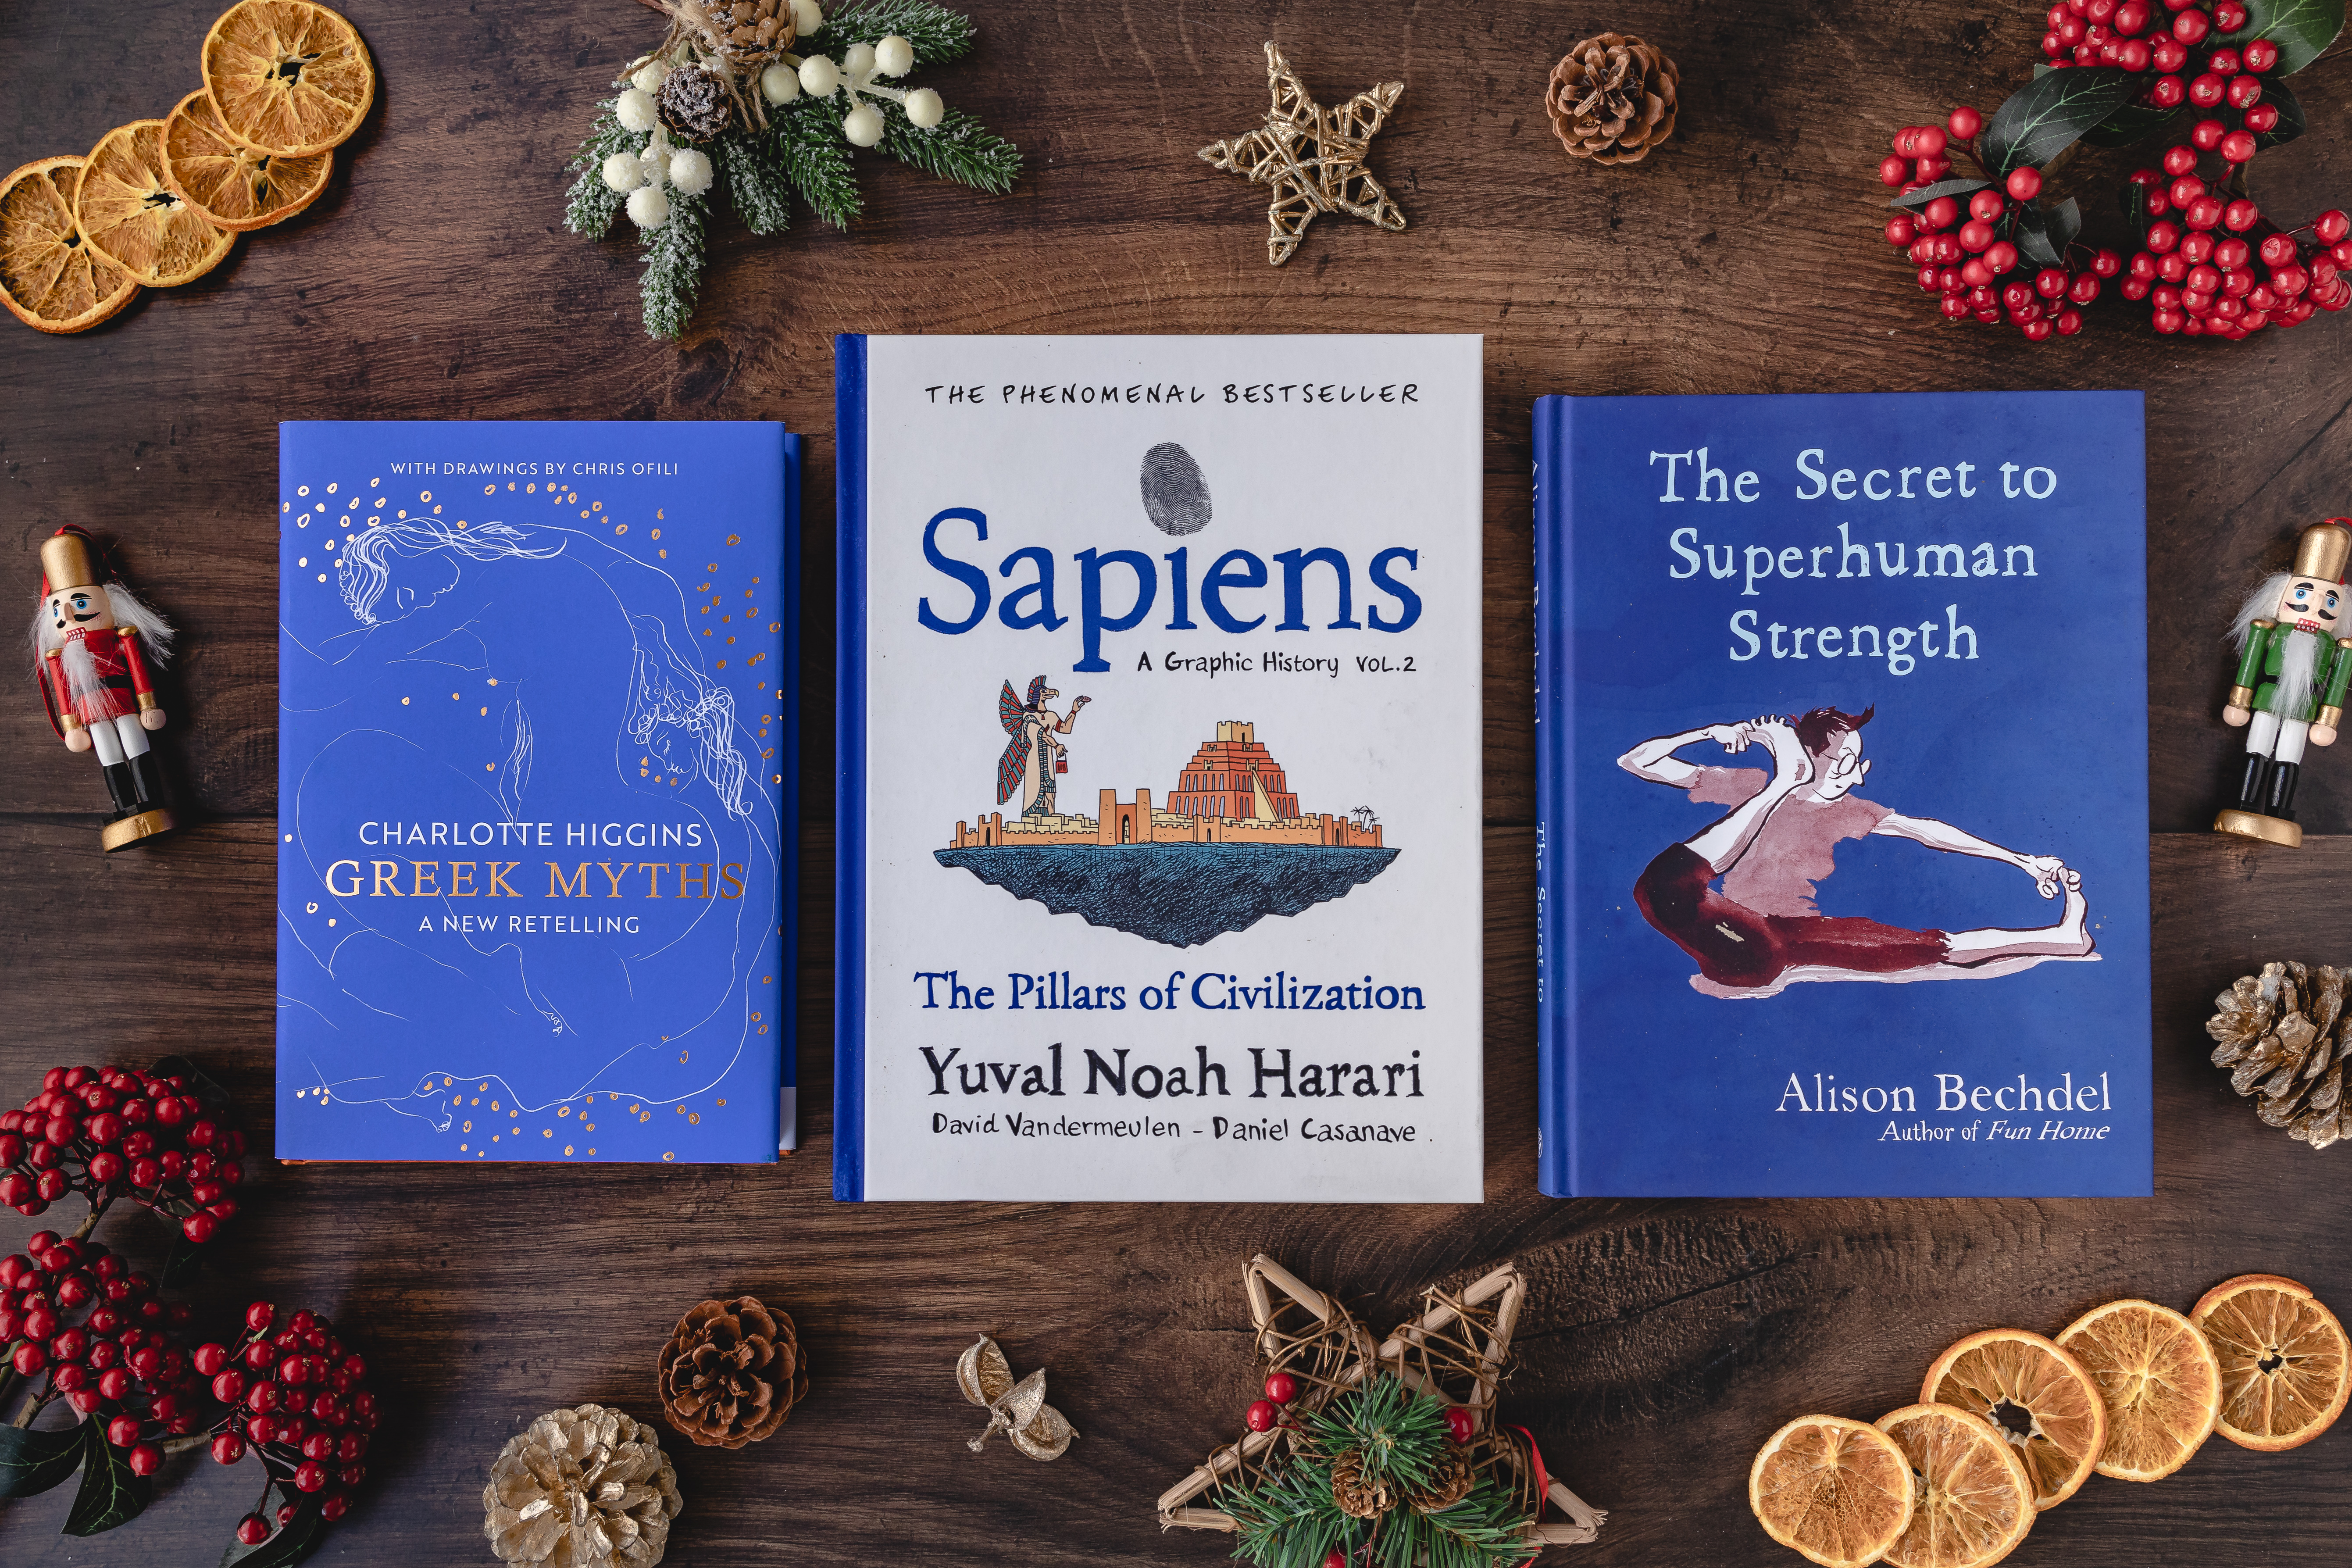 Aerial image of Greek Myths, Sapiens and The Secret to Superhuman Strength laid out on a wooden table surrounded by natural Christmas decorations.